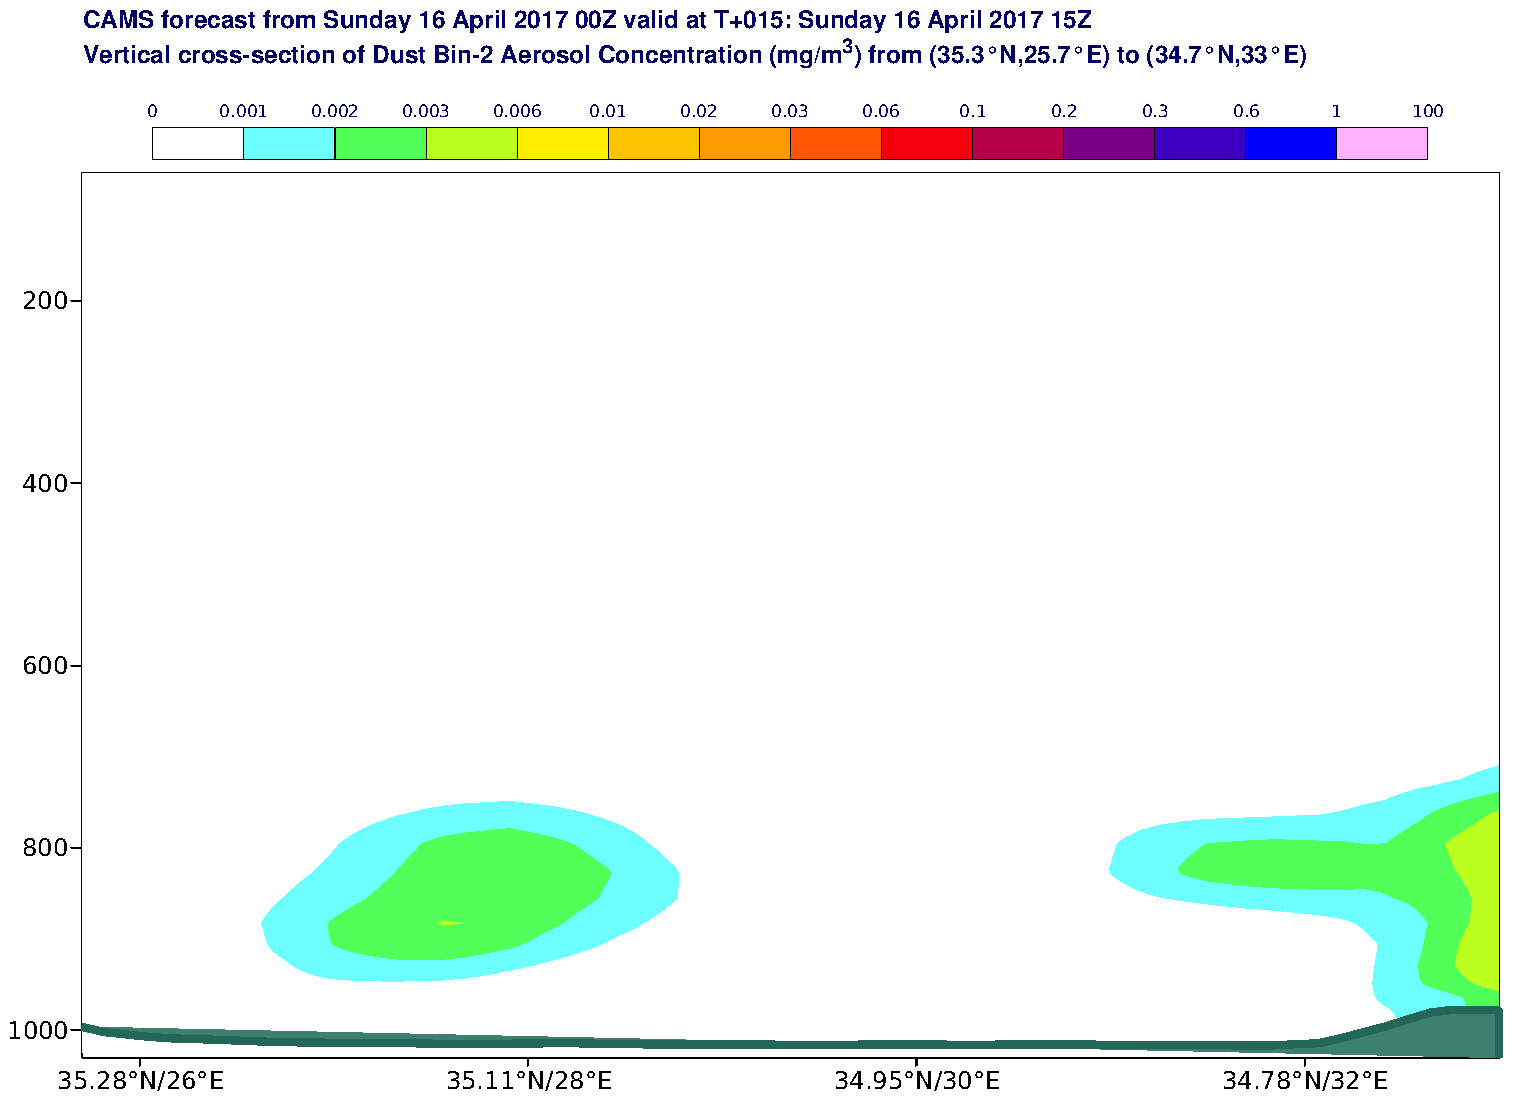 Vertical cross-section of Dust Bin-2 Aerosol Concentration (mg/m3) valid at T15 - 2017-04-16 15:00